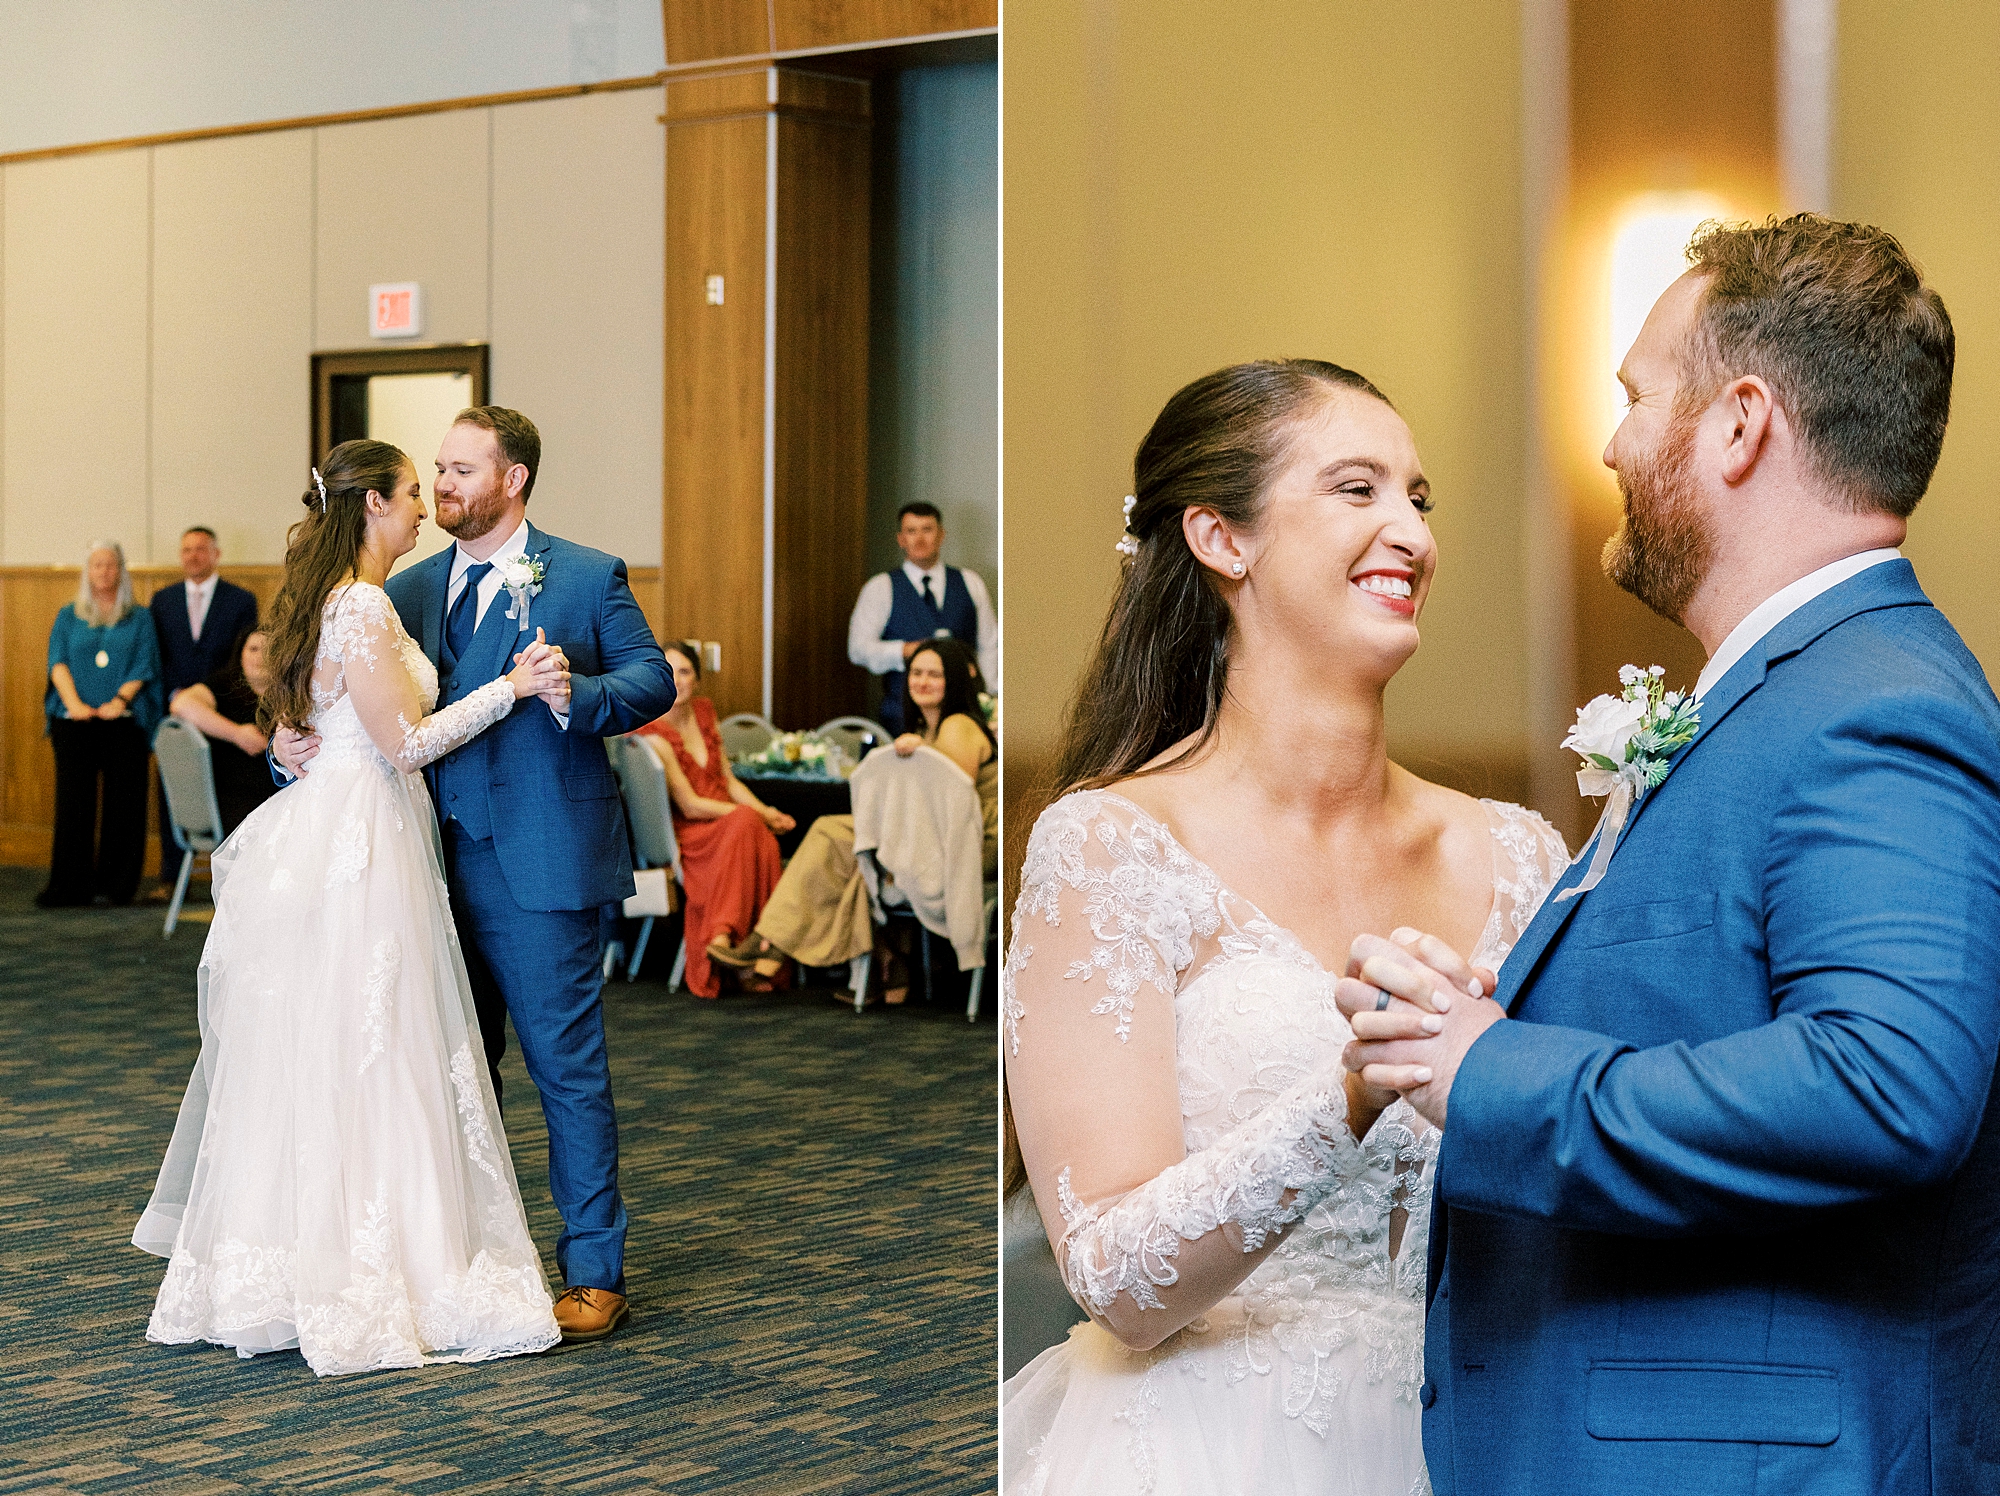 newlyweds dance together during reception in hall at downtown Kannapolis